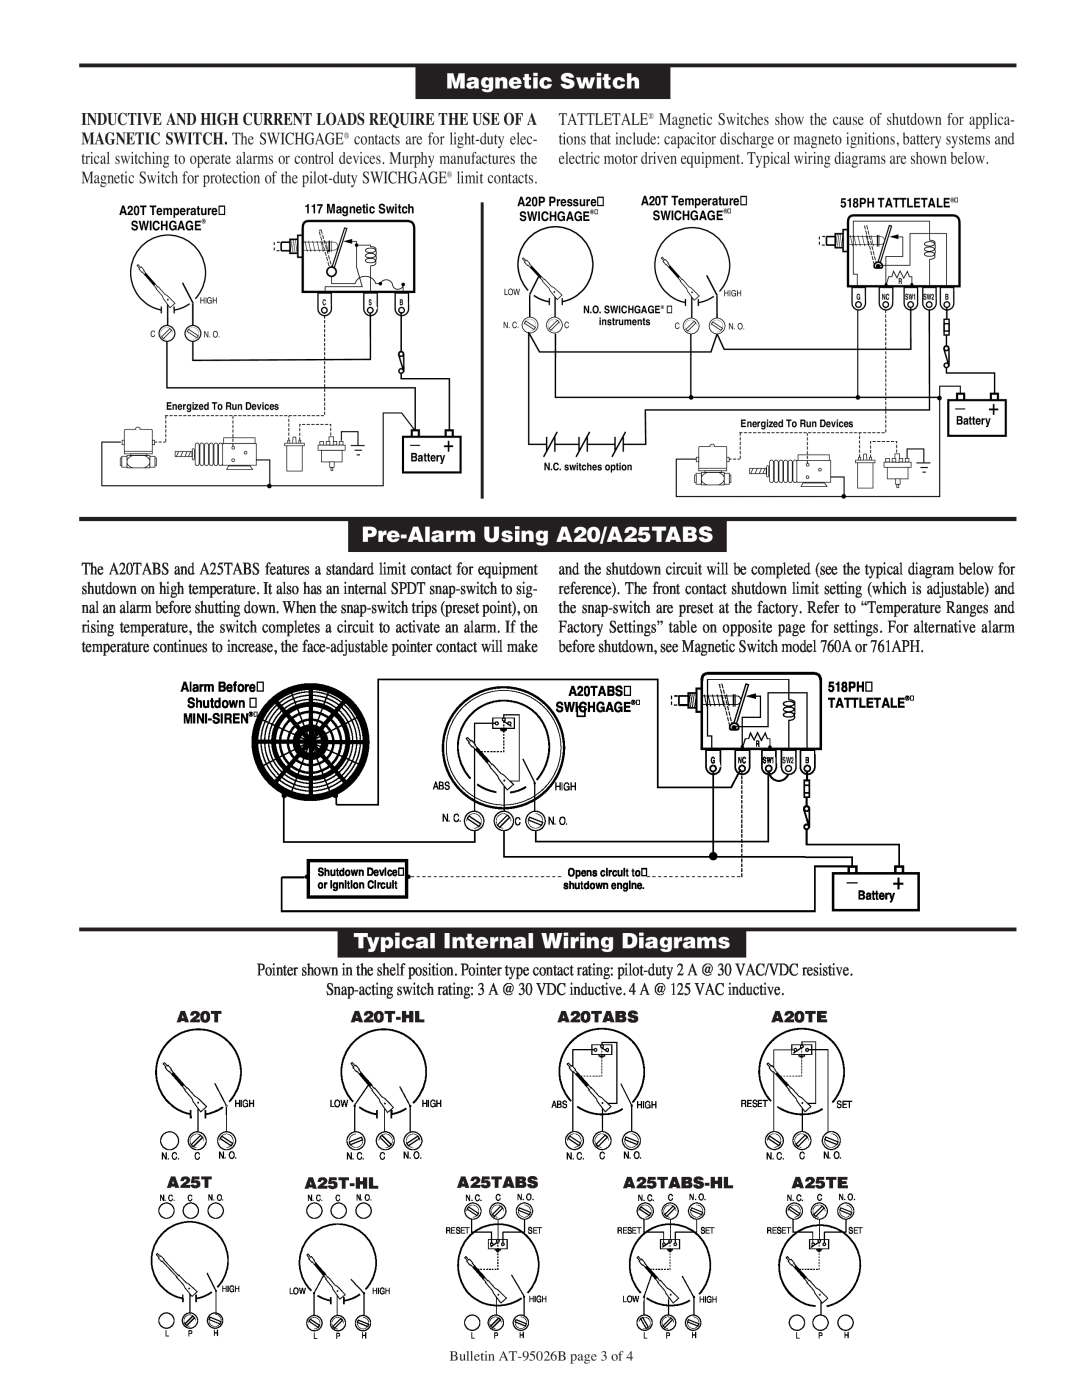 Murphy A20 Series Magnetic Switch, Pre-Alarm Using A20/A25TABS, Typical Internal Wiring Diagrams, A20T-HL, A20TABS 